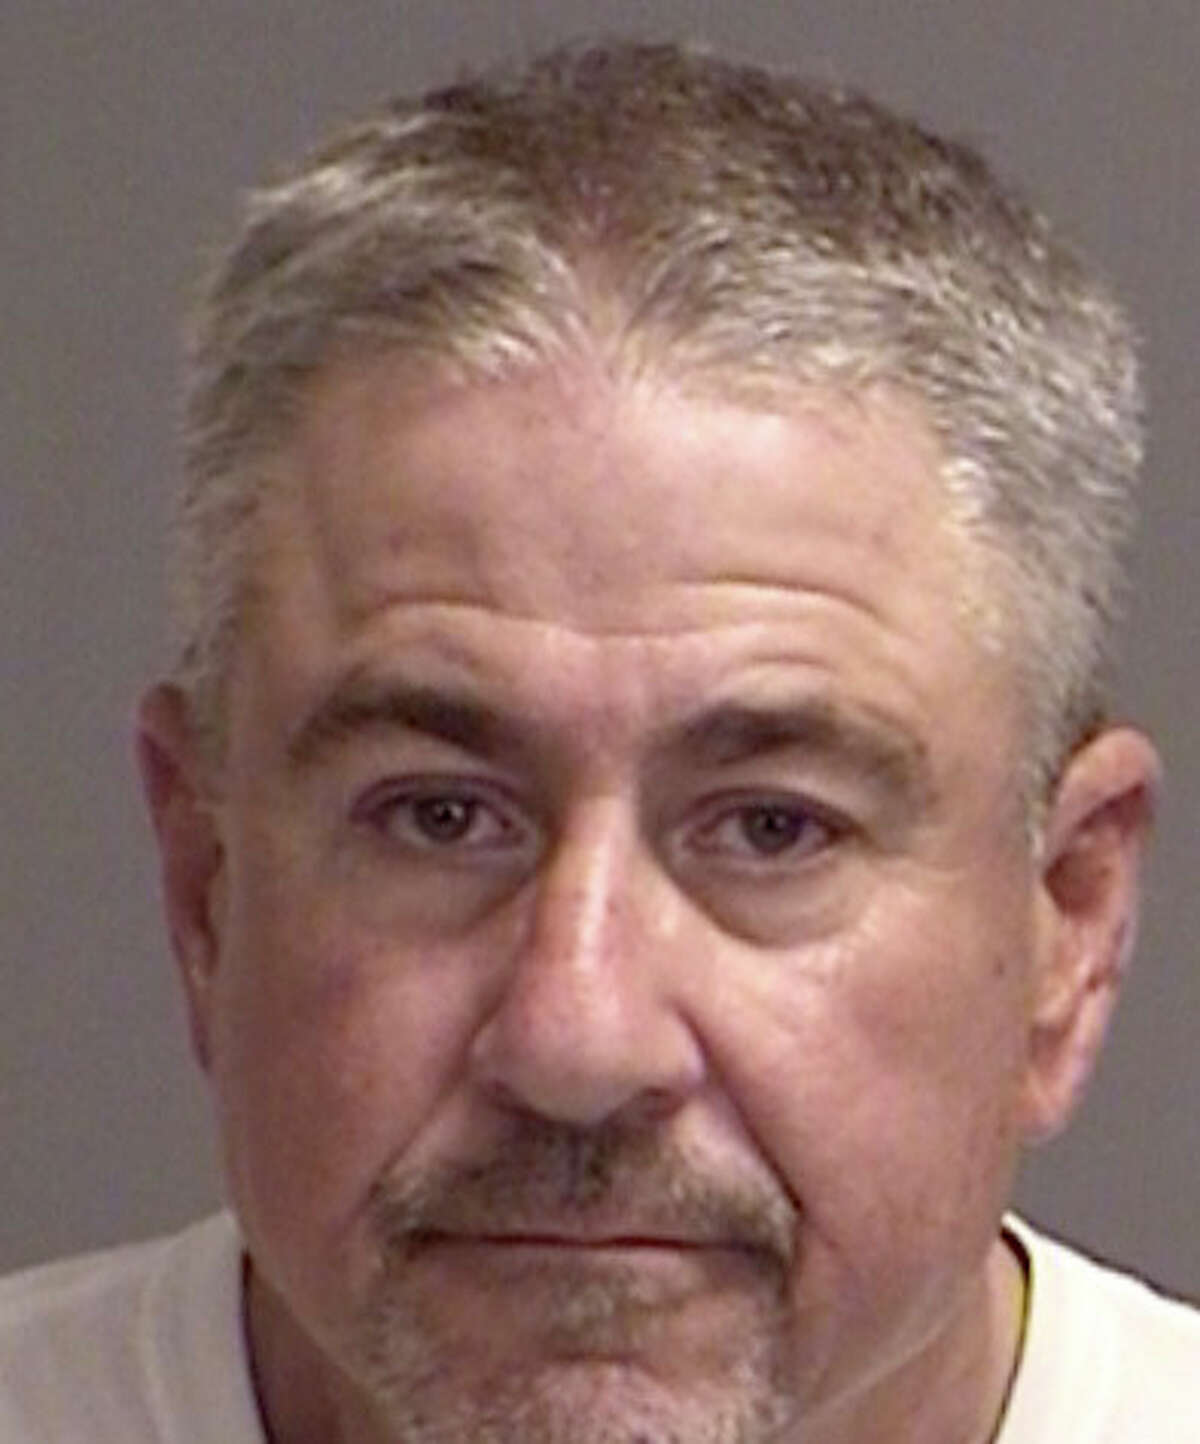 Guadalupe County Judge Michael Thomas Wiggins Wiggins, 58, was charged with possession of marijuana less than 2 ounces and released from the Brazos County Jail on $3,000 bail, according to county records and College Station Police Department spokeswoman Officer Rhonda Seaton.